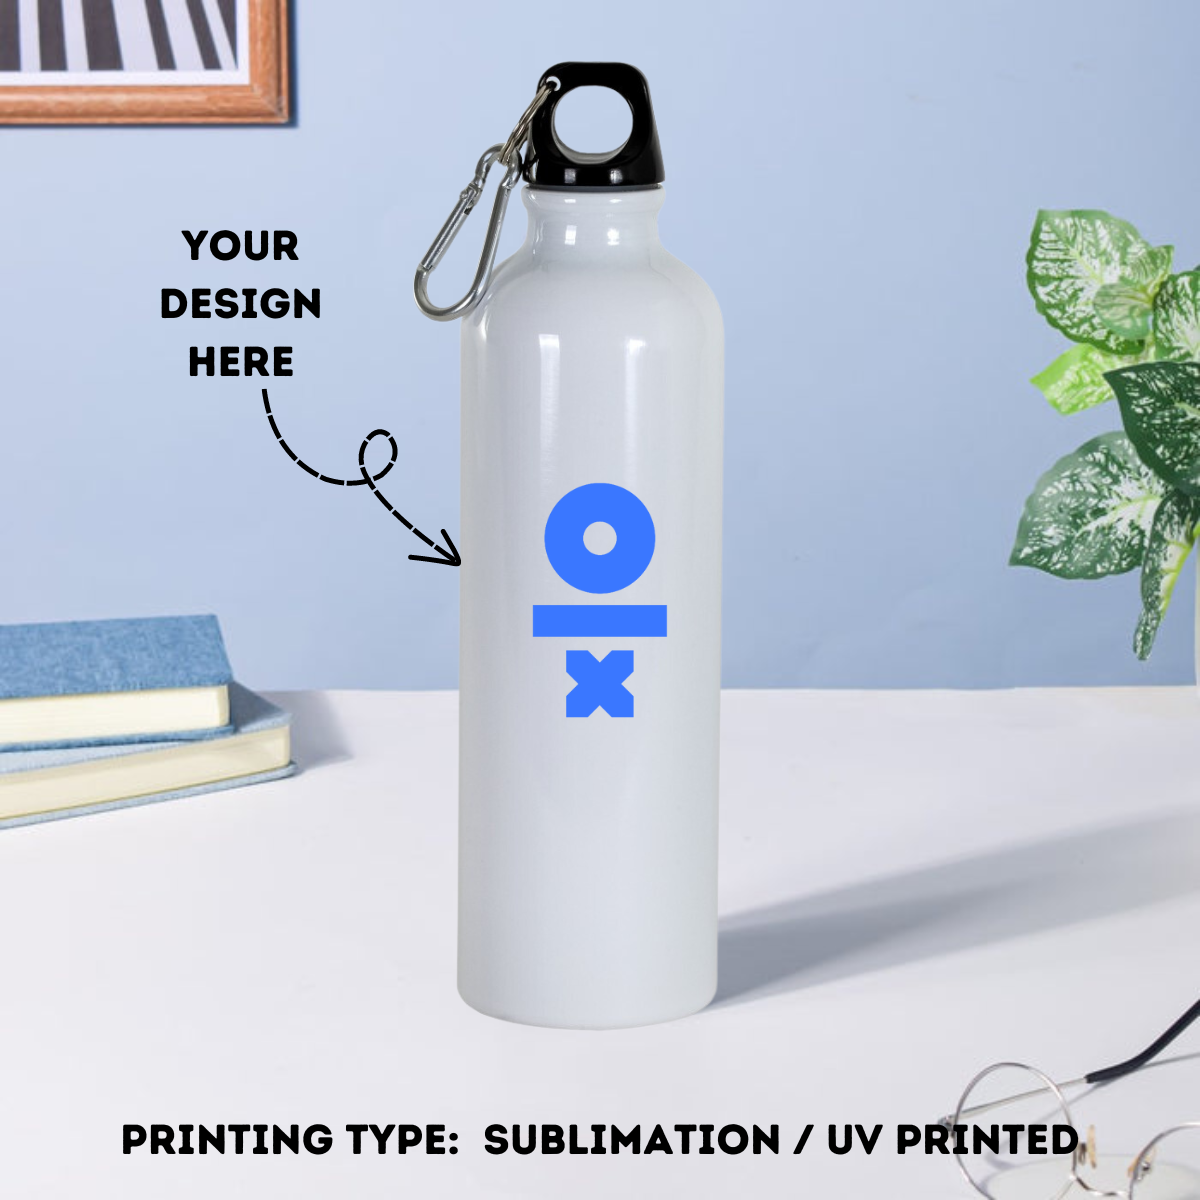 Personalized White Aluminium Water Bottle Multicolor UV or Sublimation Printed - 750ml - For Return Gift, Corporate Gifting, Office or Personal Use